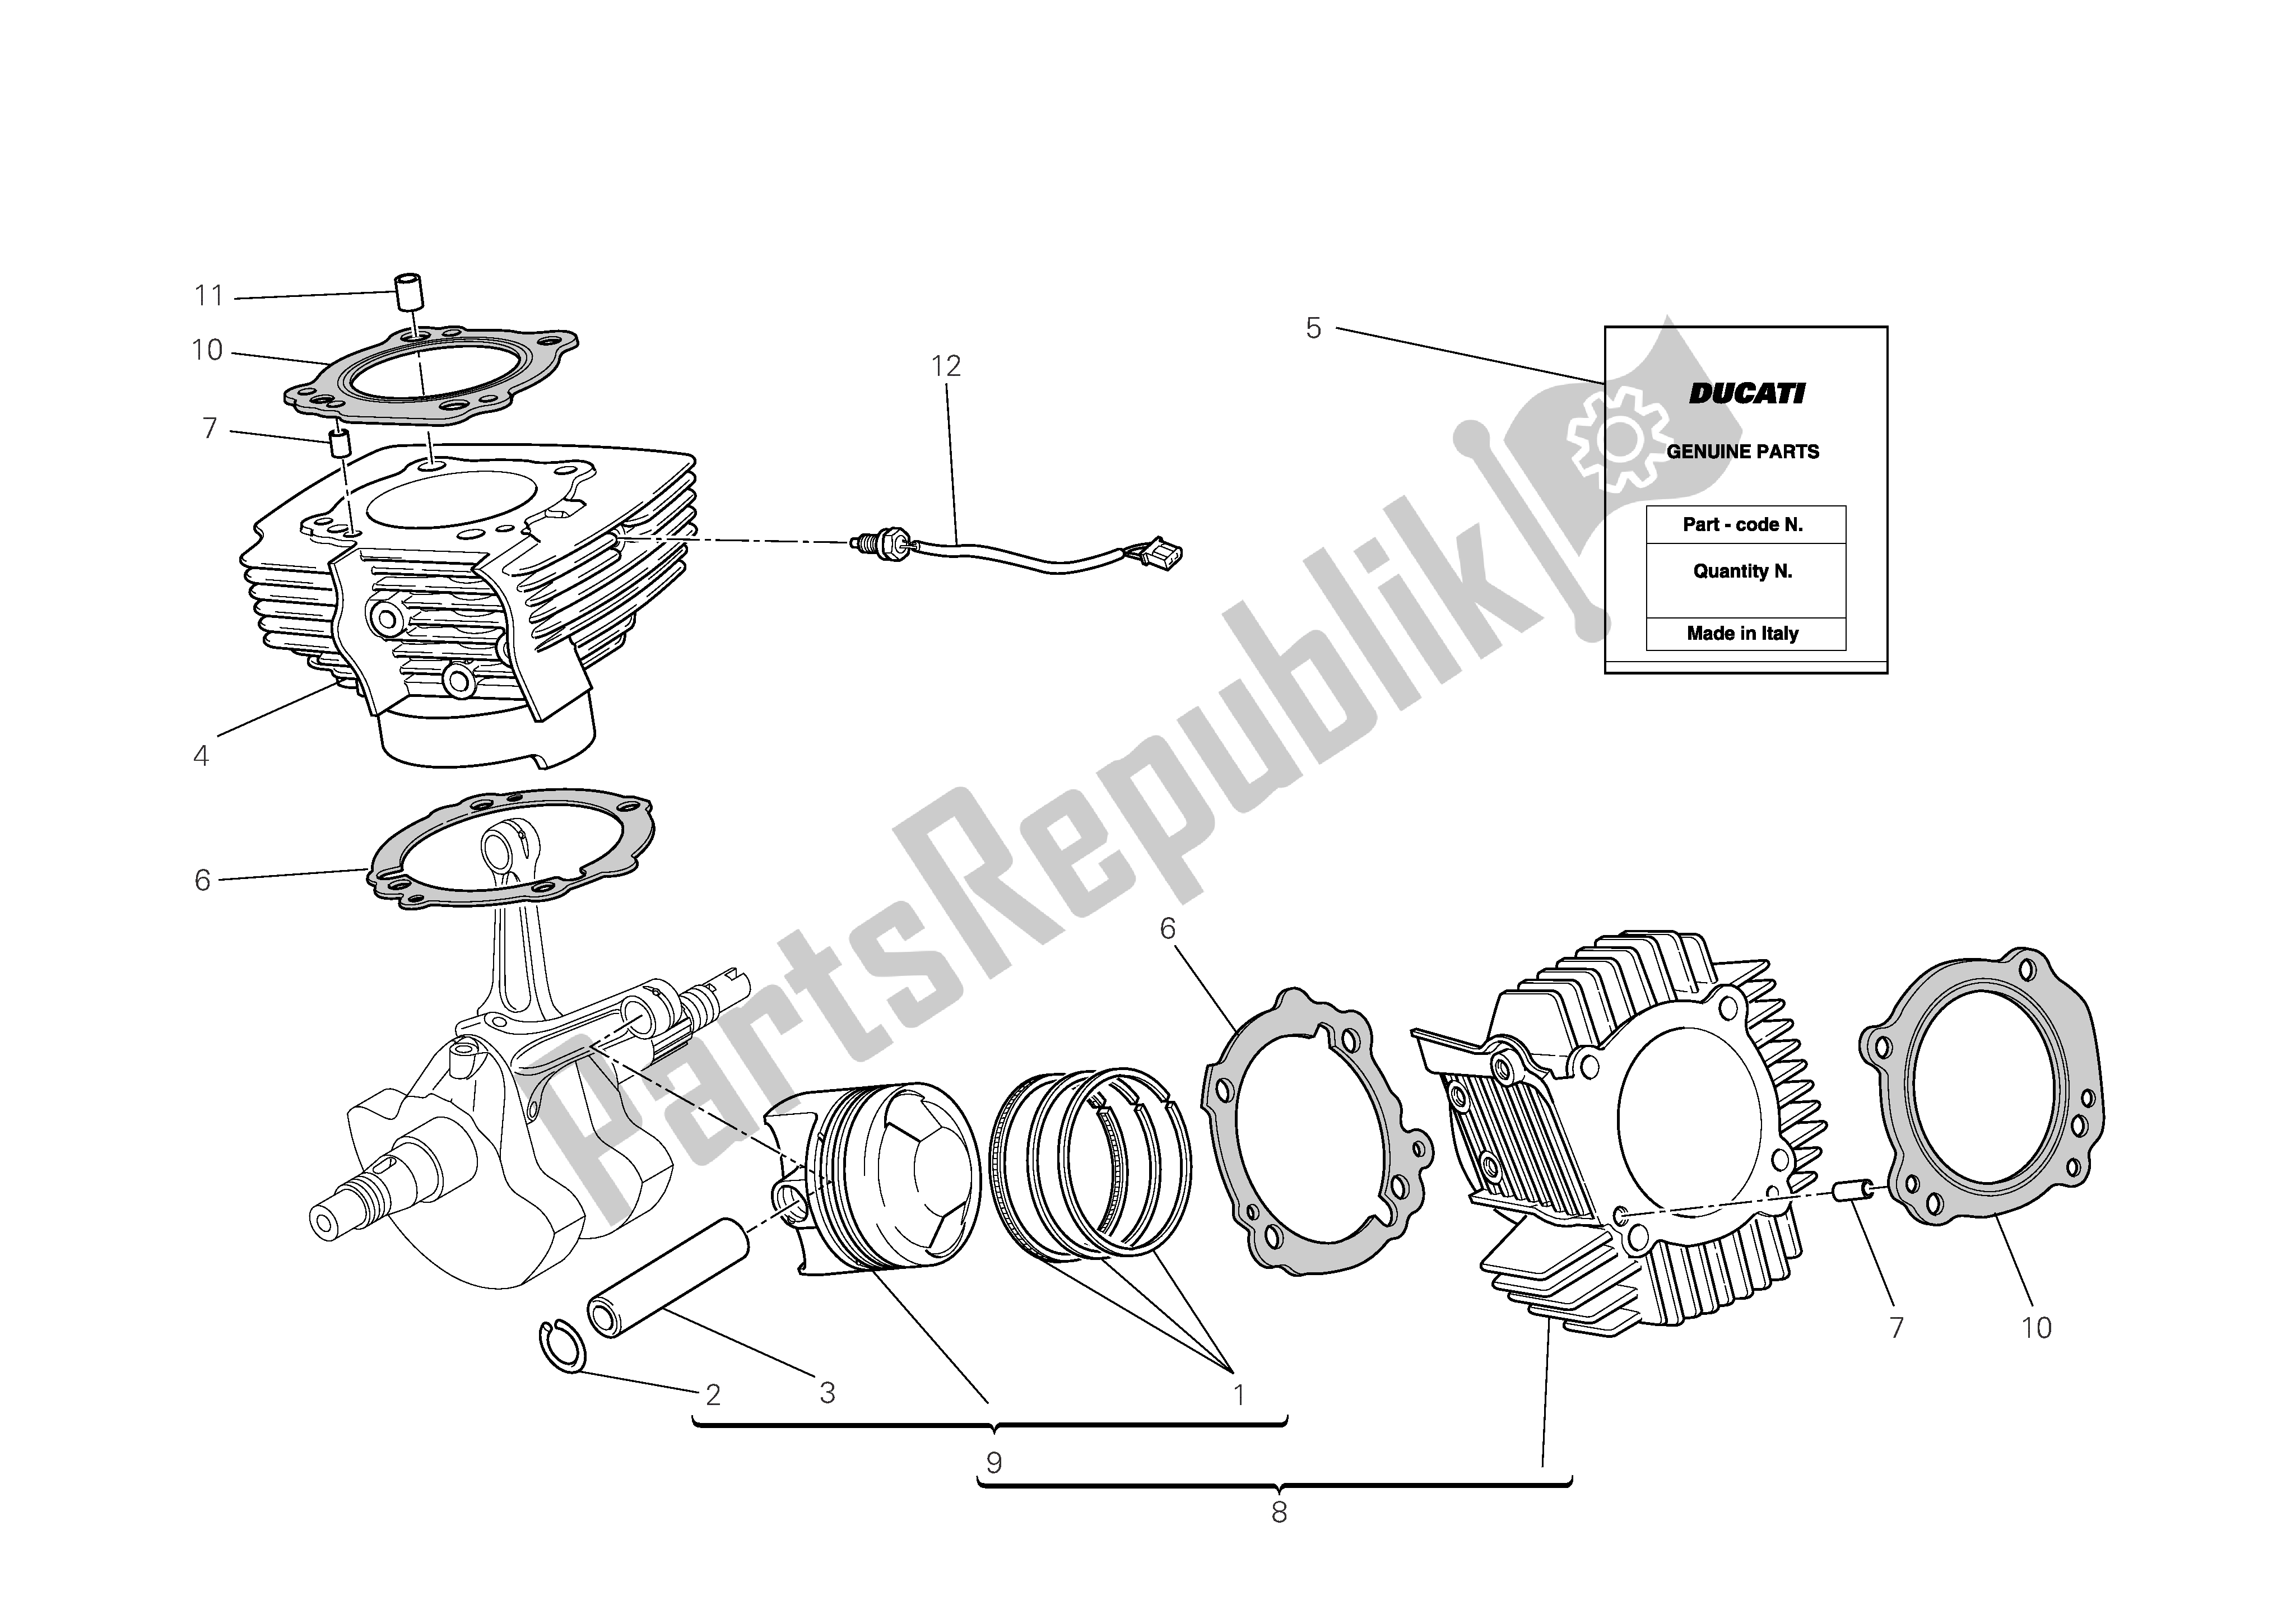 All parts for the Cylinders - Pistons of the Ducati Monster 696 2009